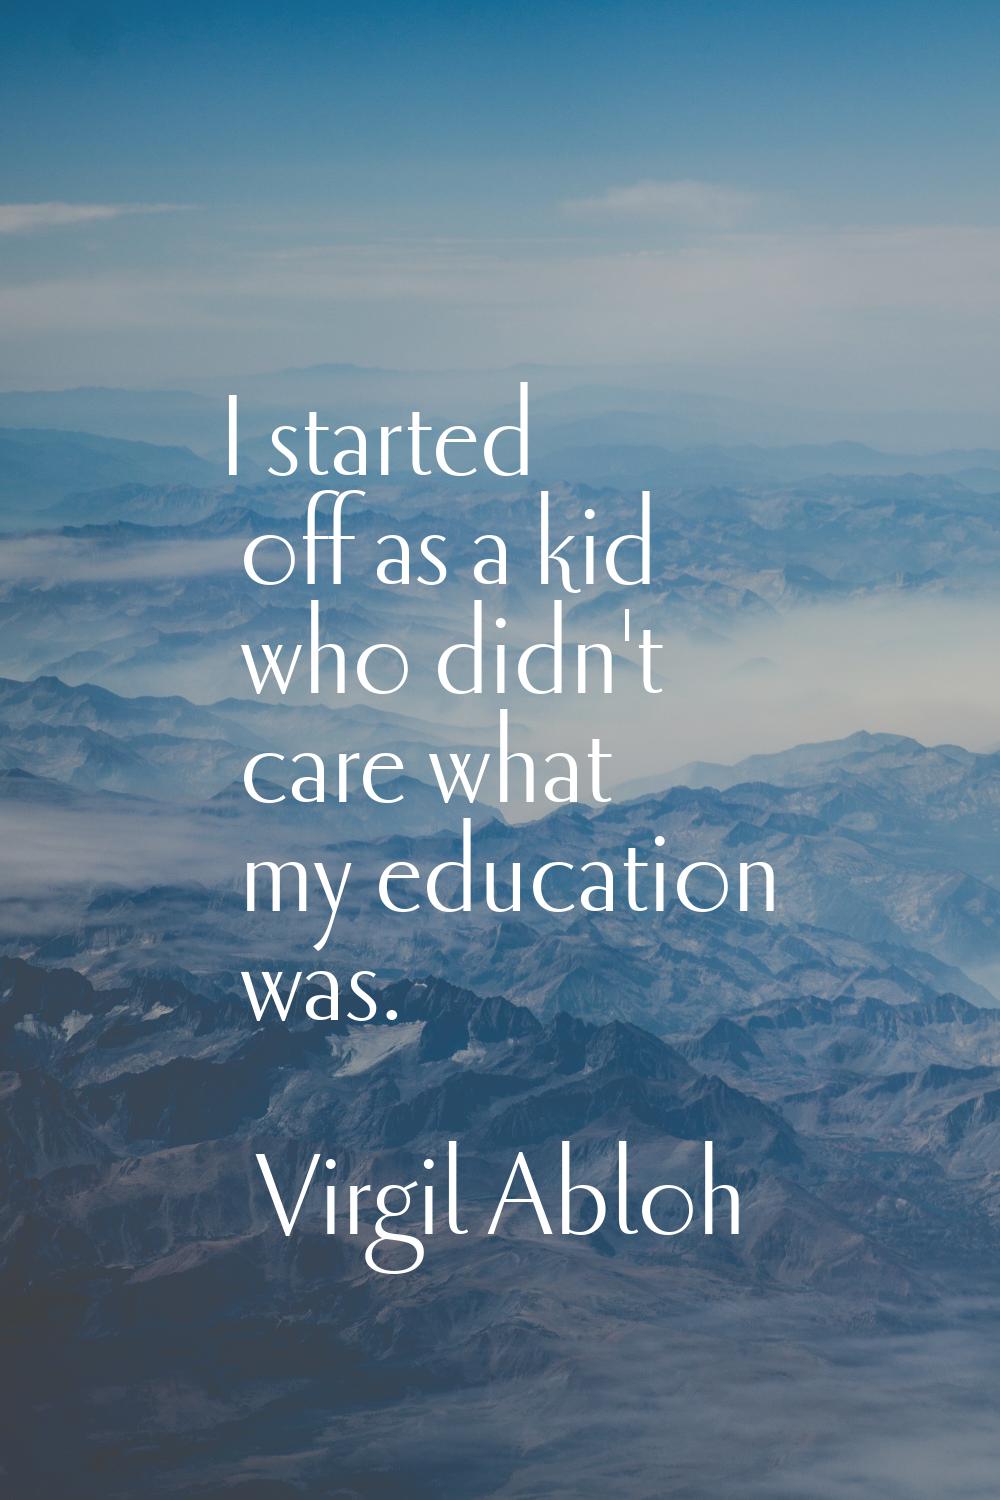 I started off as a kid who didn't care what my education was.